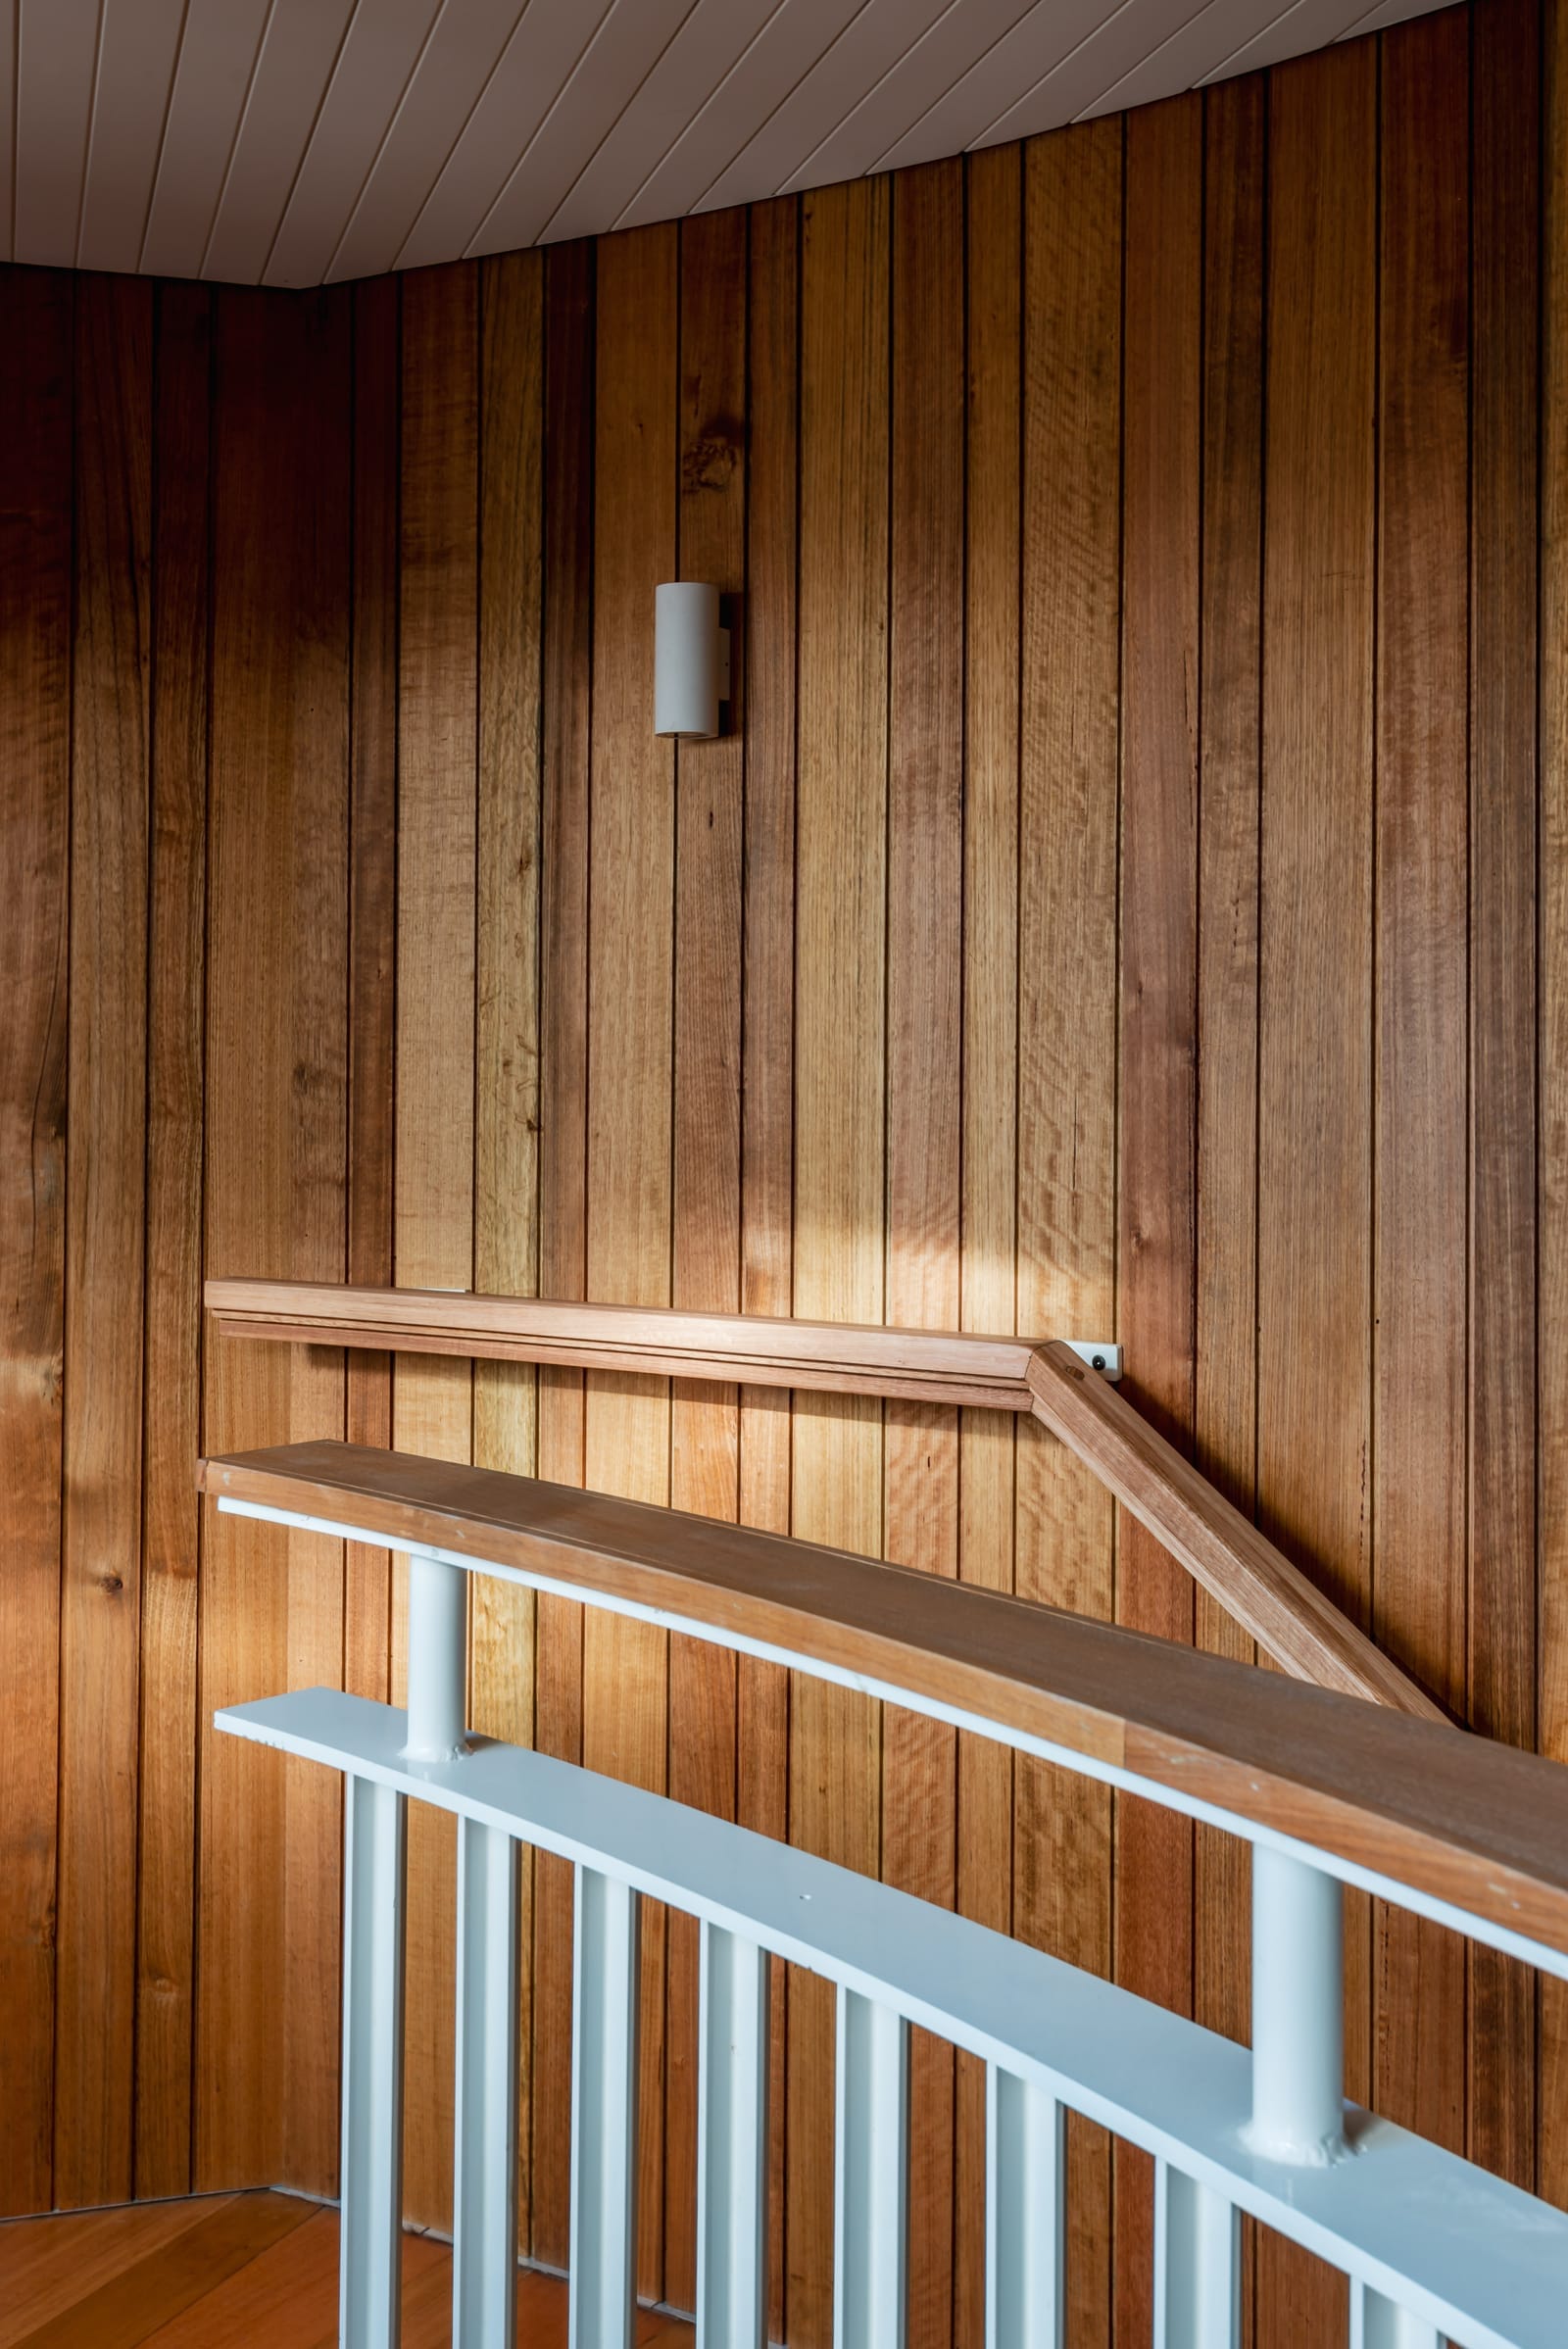 Wattle Bird House by Flett Architecture. Photography by Matt Sansom. Timber and metal balustrade in front of timber paneled wall and timber floor. 